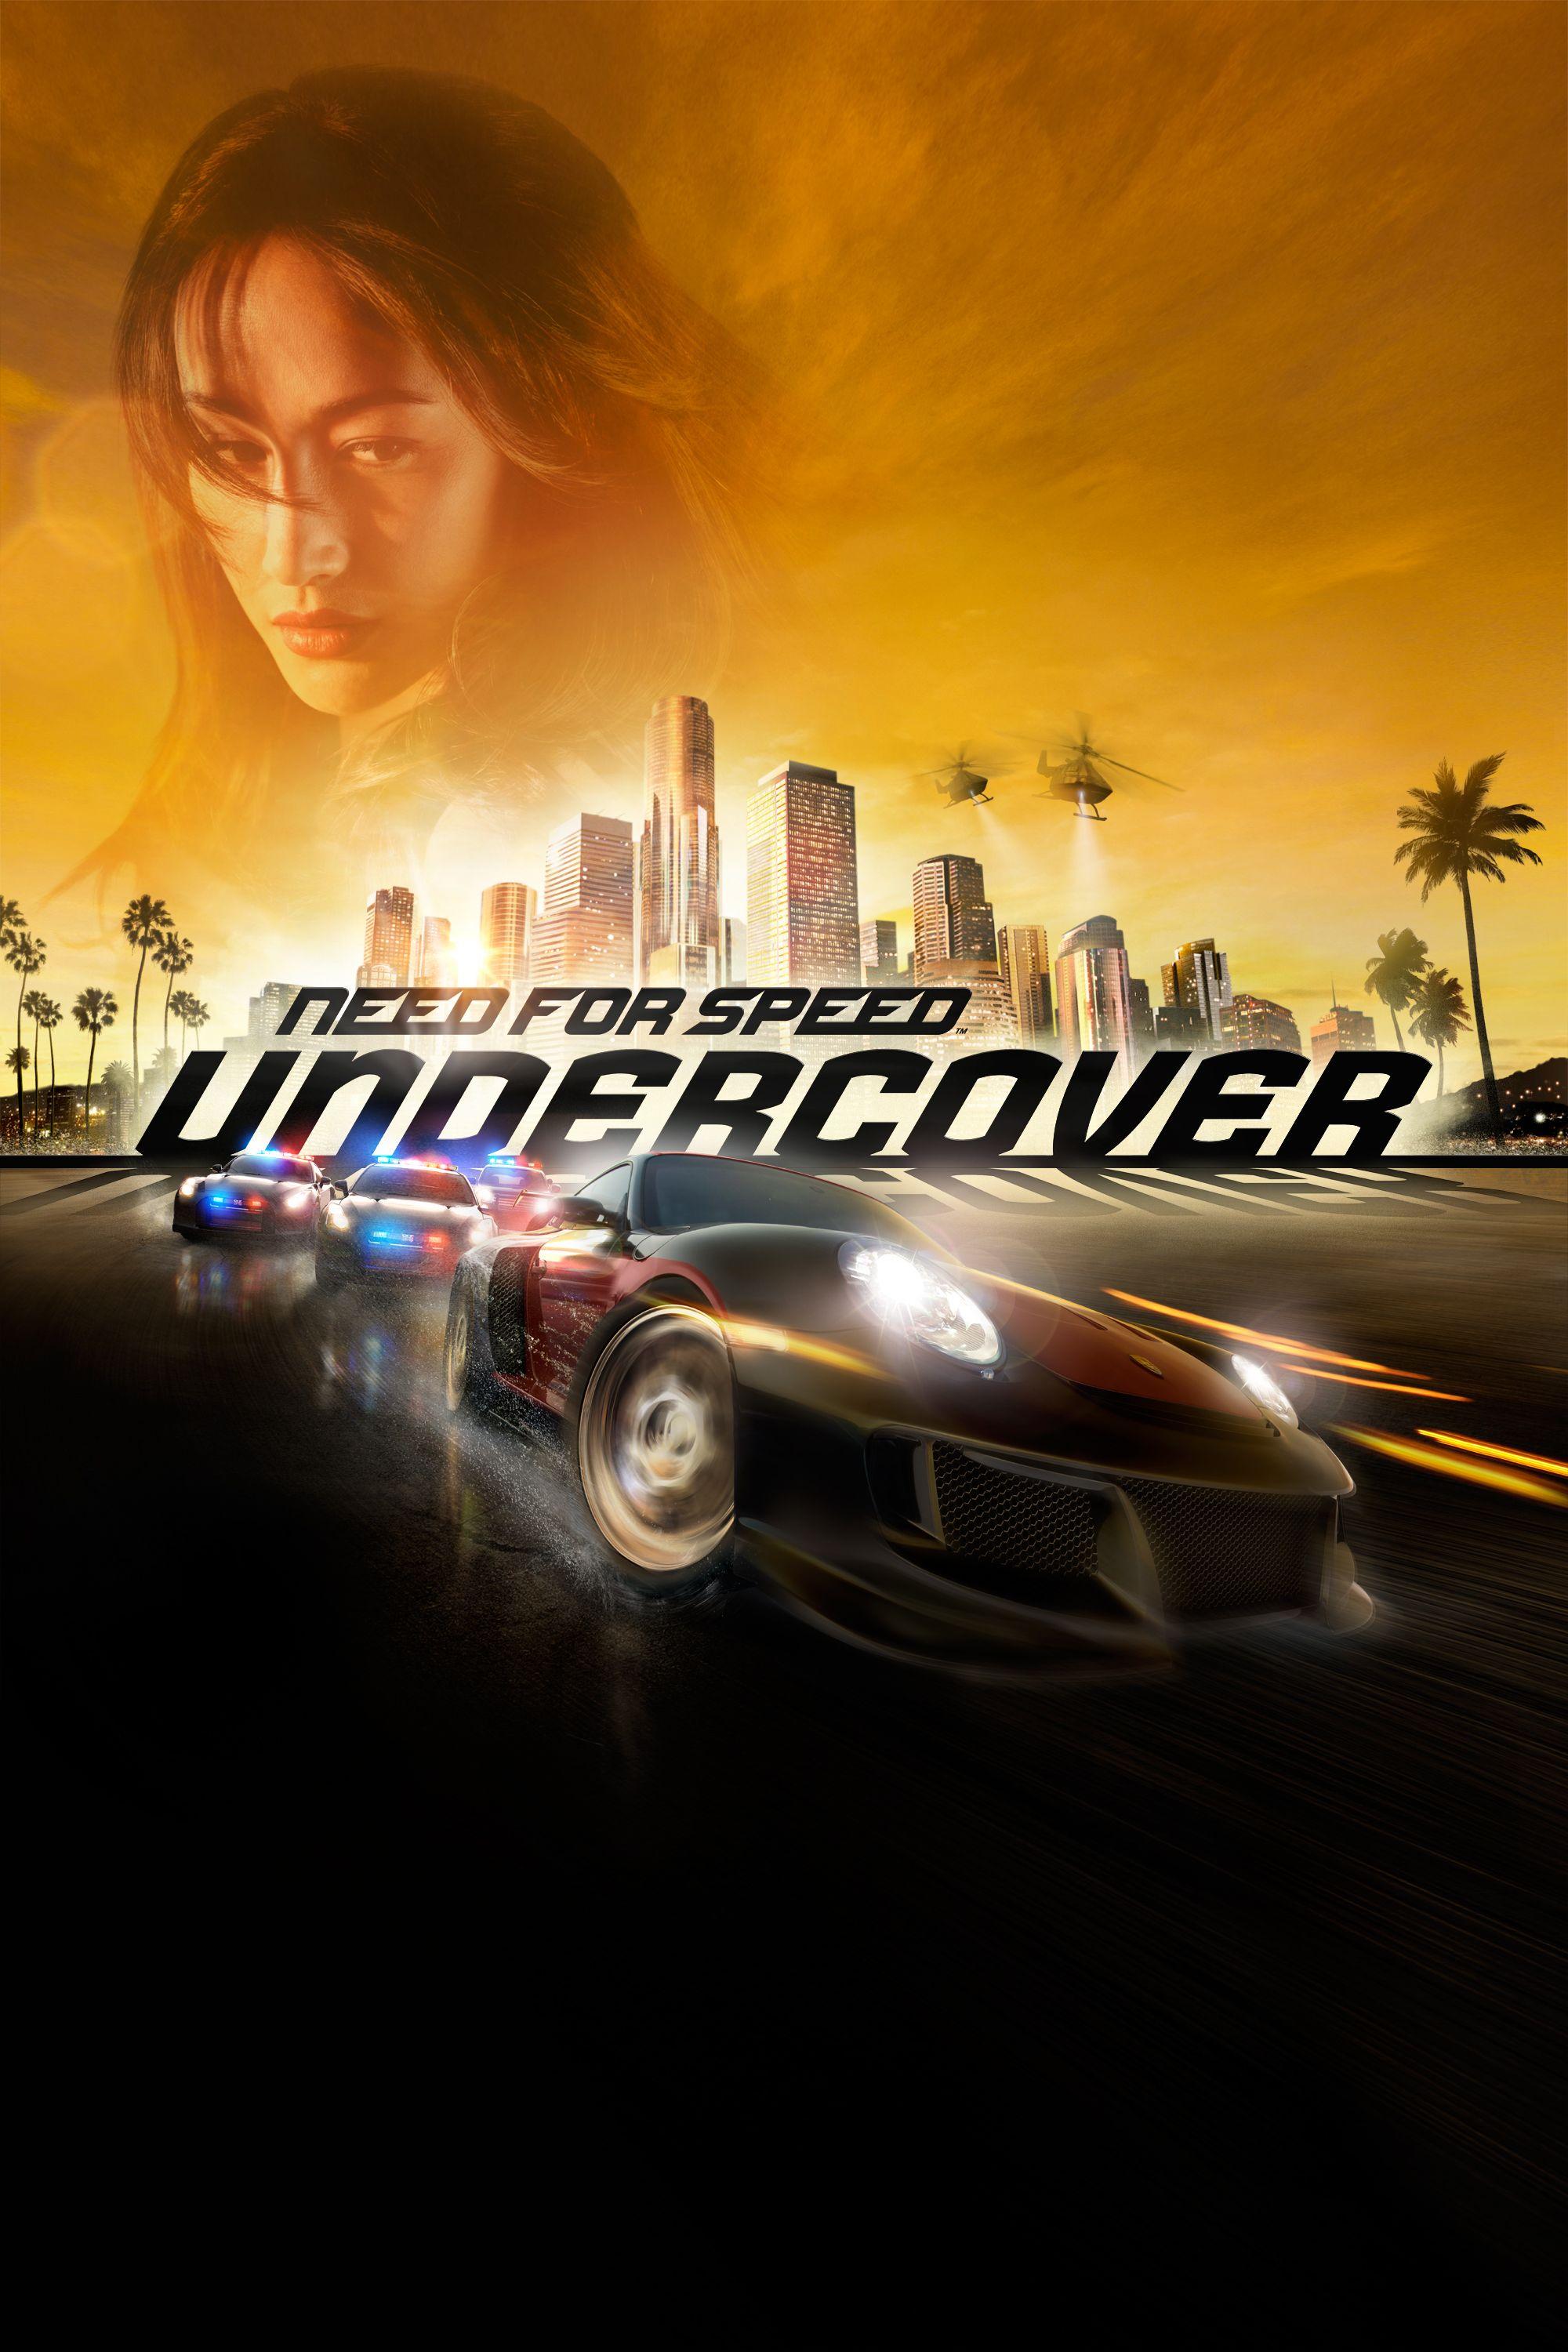 Need for Speed Undercover Logo - Need for Speed: Undercover | Need for Speed Wiki | FANDOM powered by ...